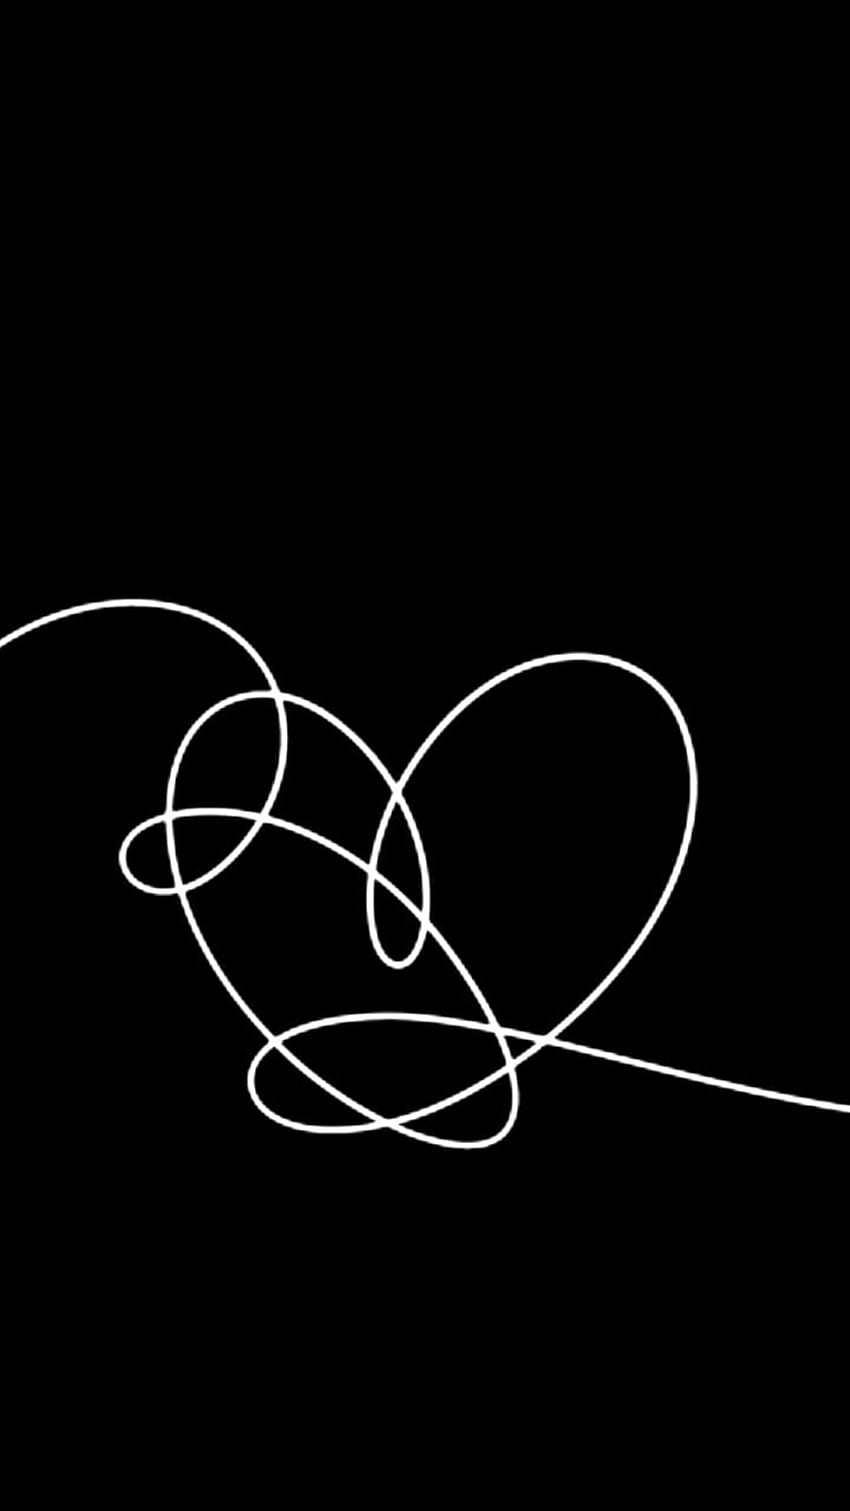 Bts Love Yourself Answer Logo Png, Transparent Png , Transparent Png Image  - PNGitem